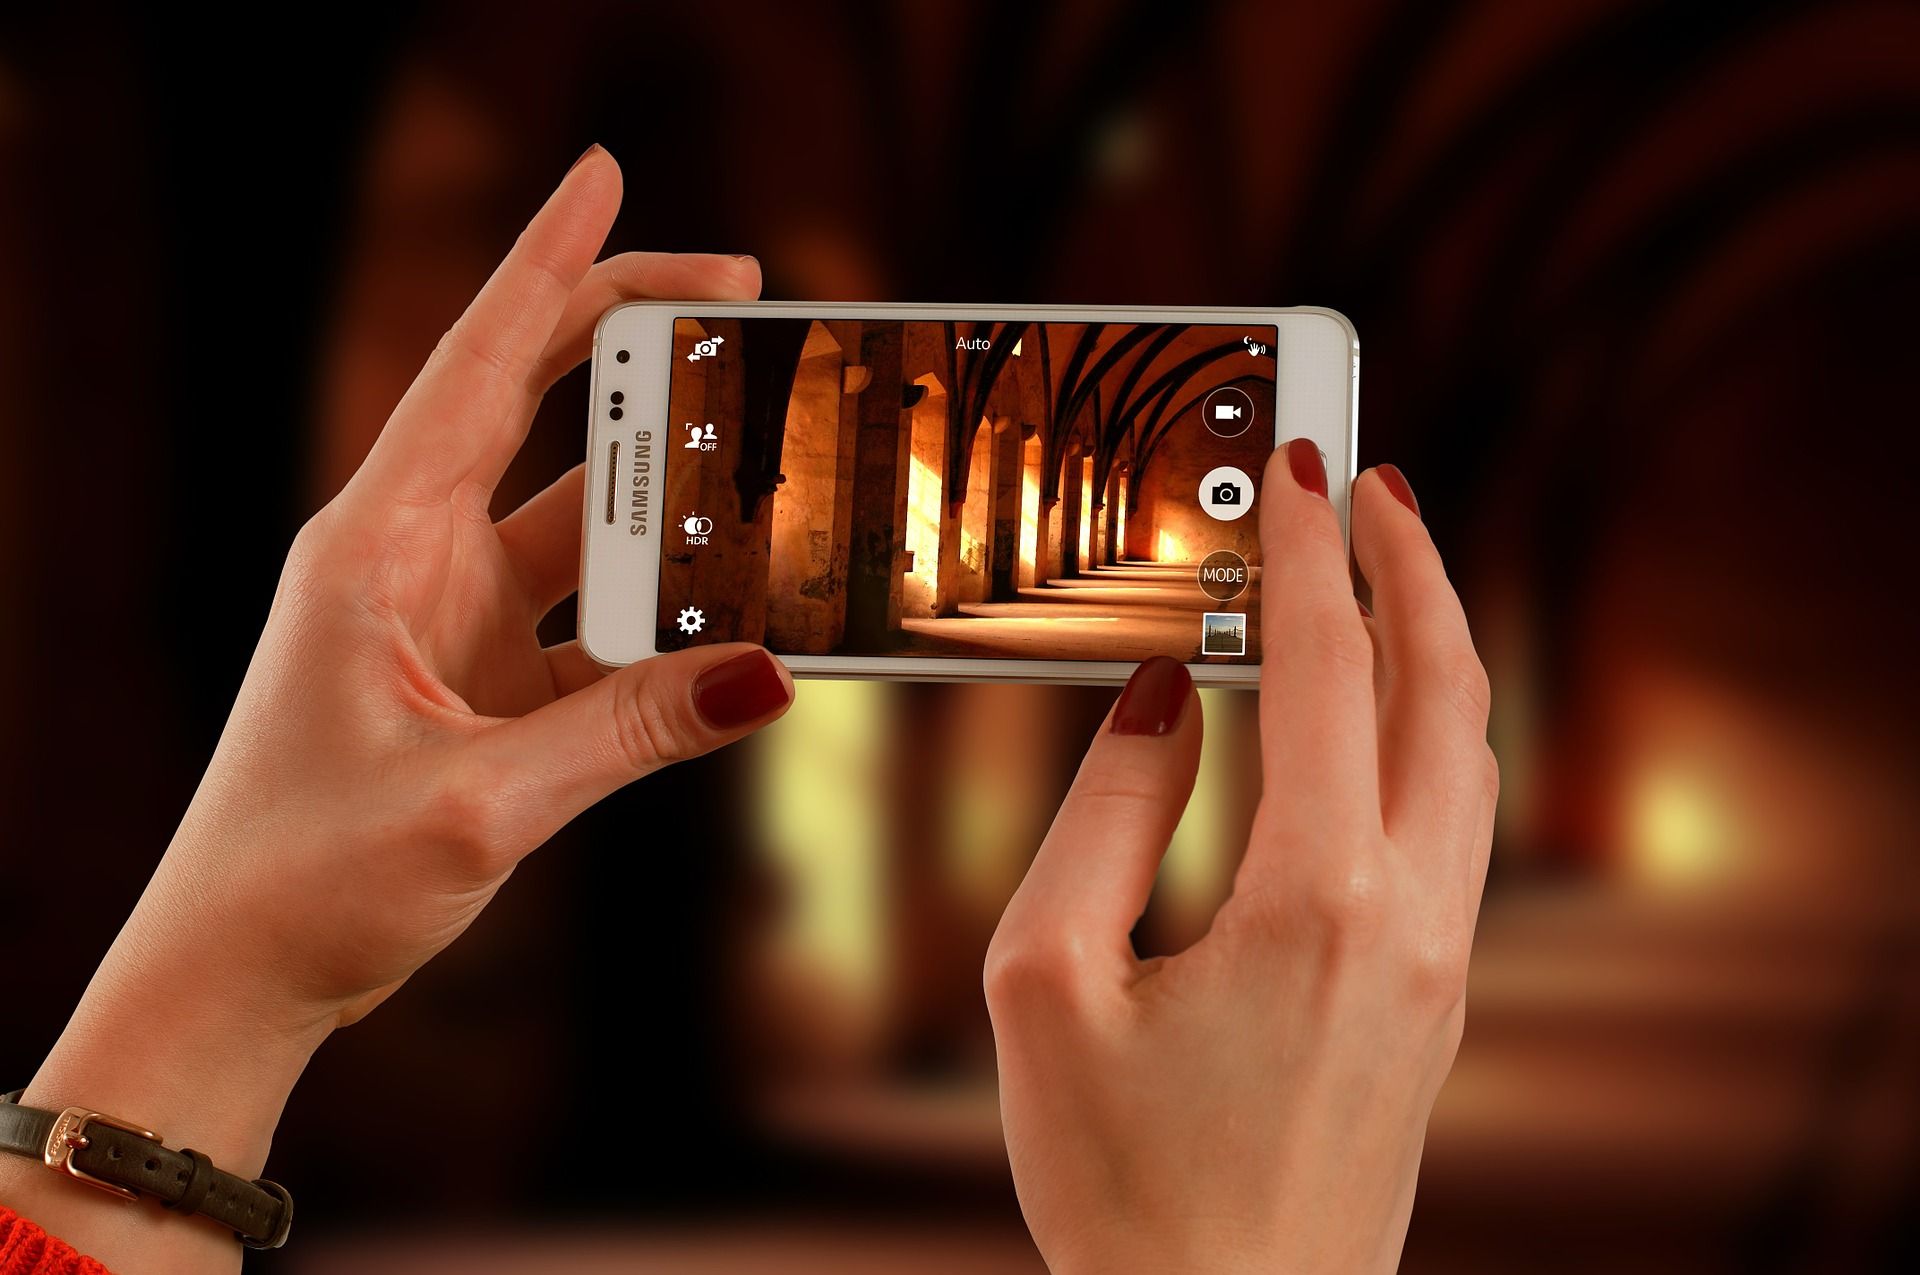 Two hands holding a smartphone in dark hall